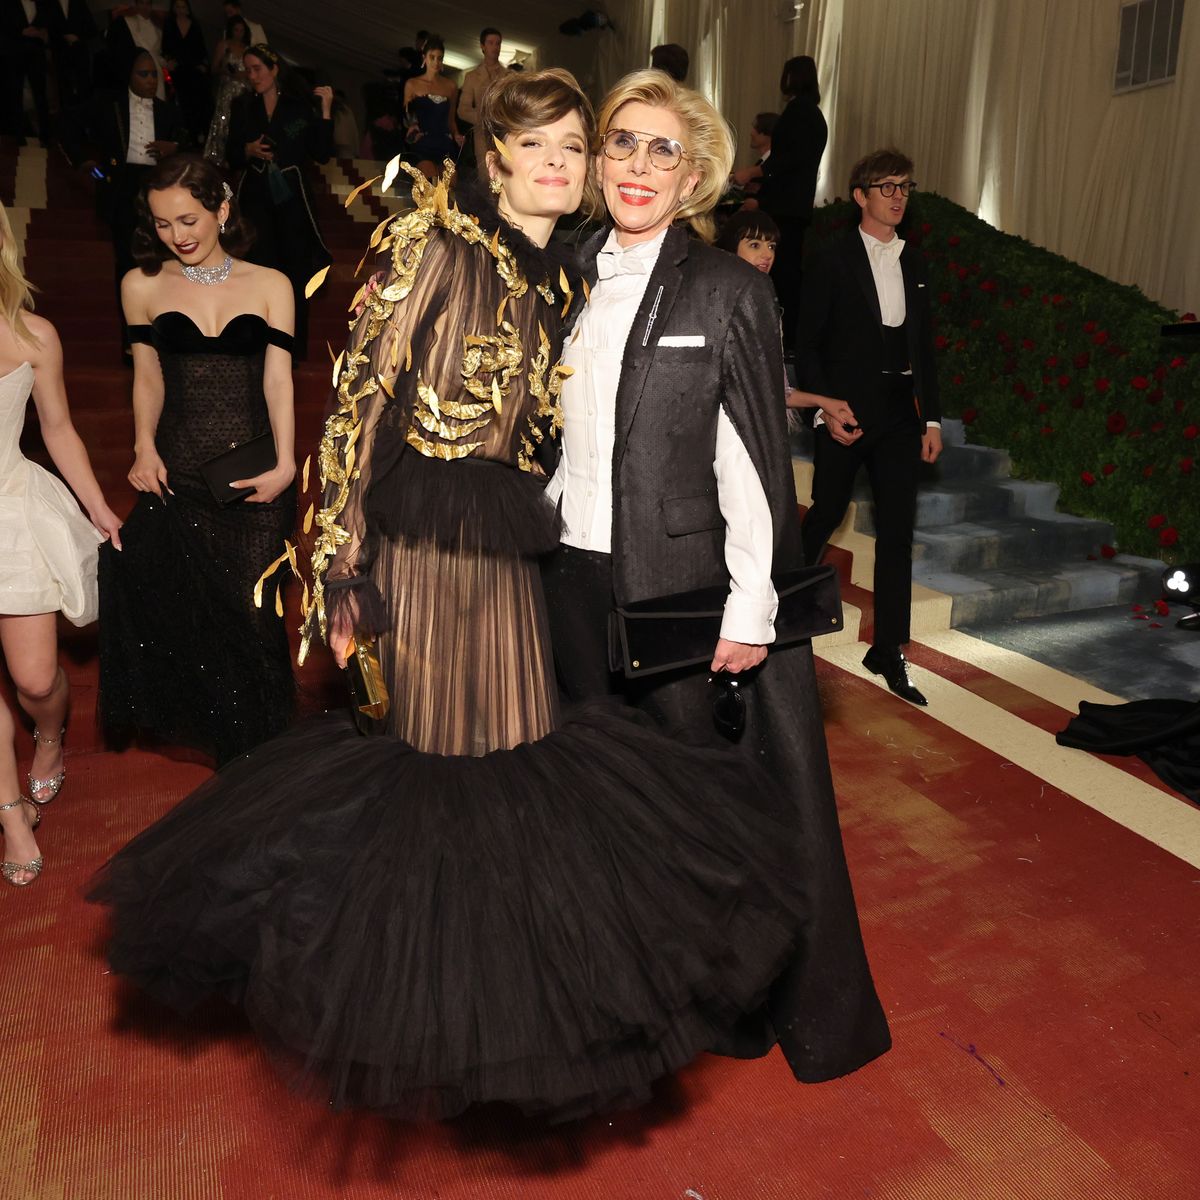 The Gilded Age Cast Including Louisa Jacobson & Christine Baranski Reunited  at the Met Gala